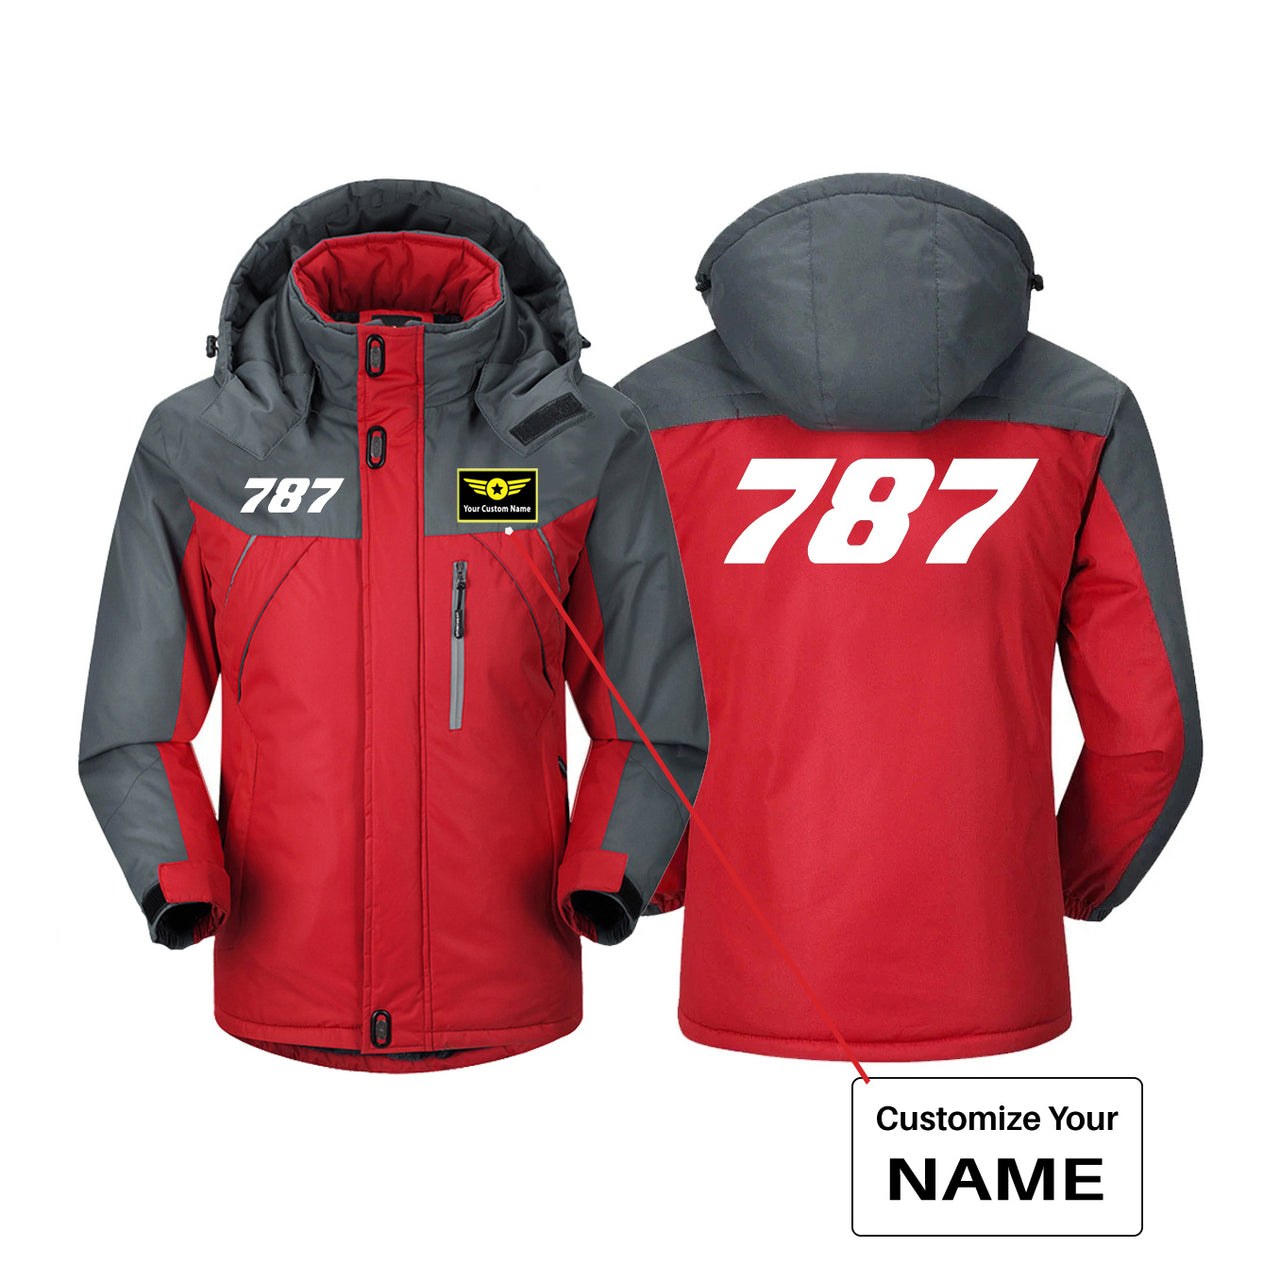 787 Flat Text Designed Thick Winter Jackets